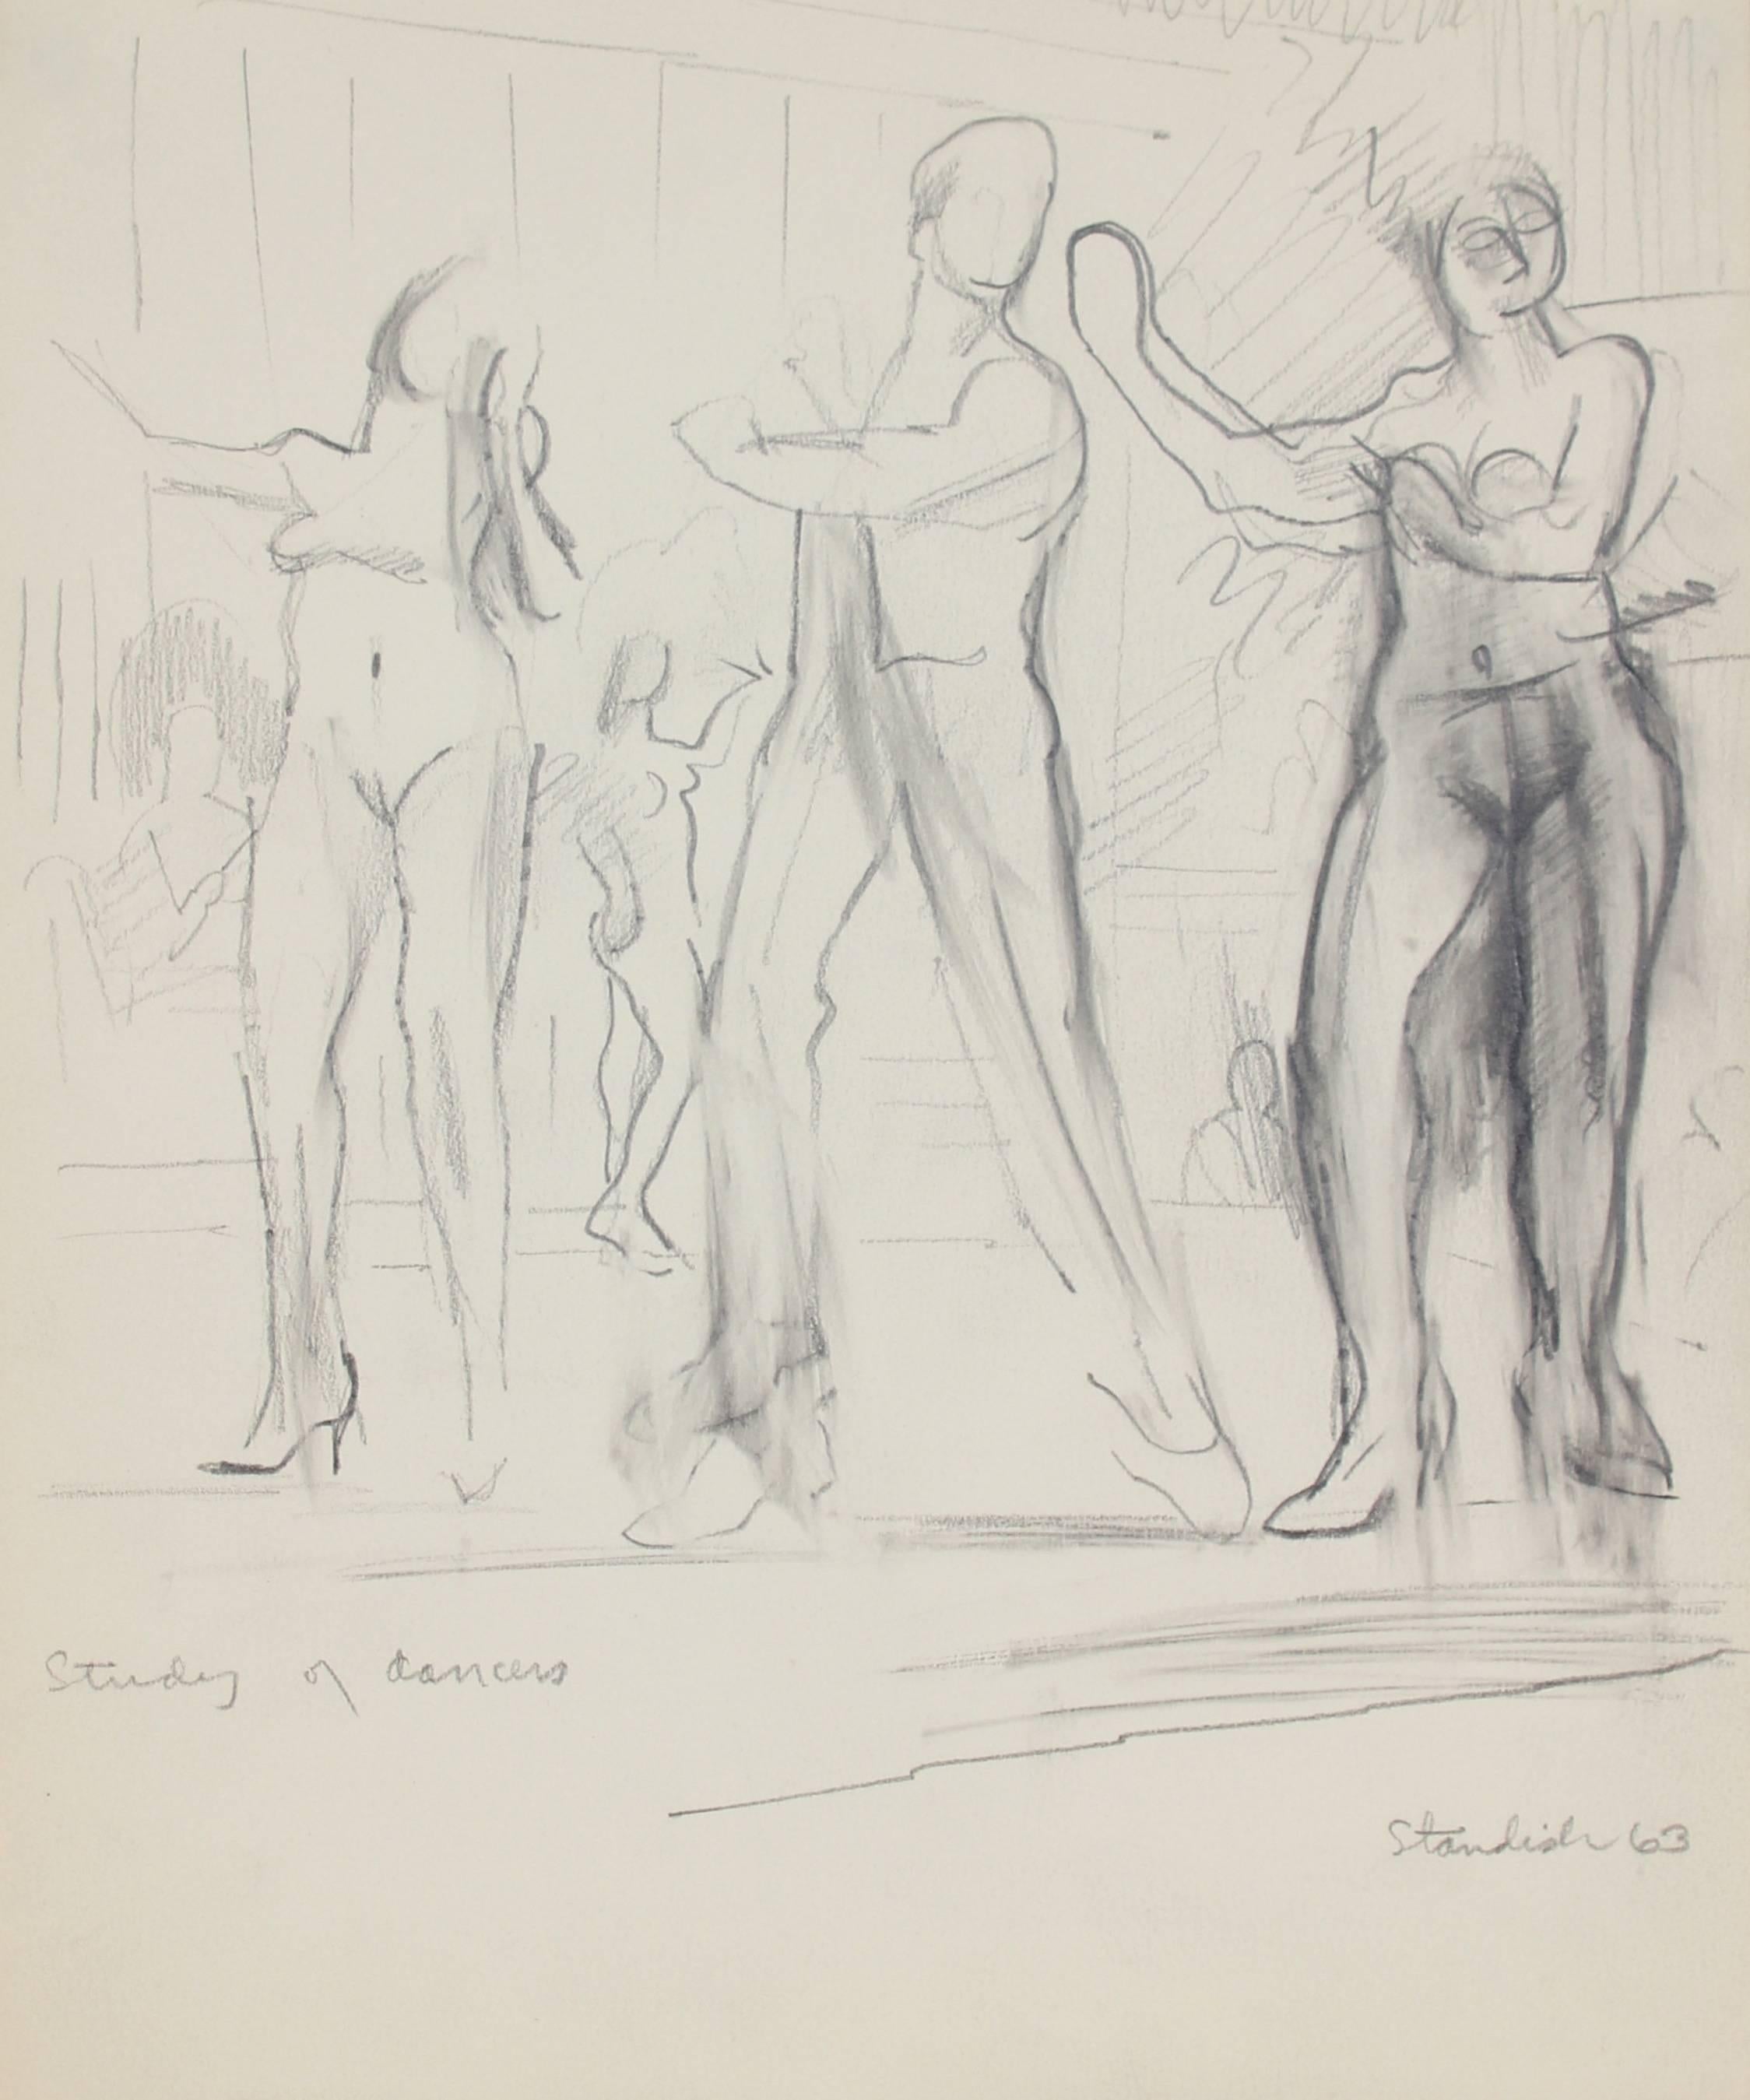 Schuyler Standish Figurative Art - "Study of Dancers" Monochomatic Graphite on Paper Drawing of Nude Dancers, 1963